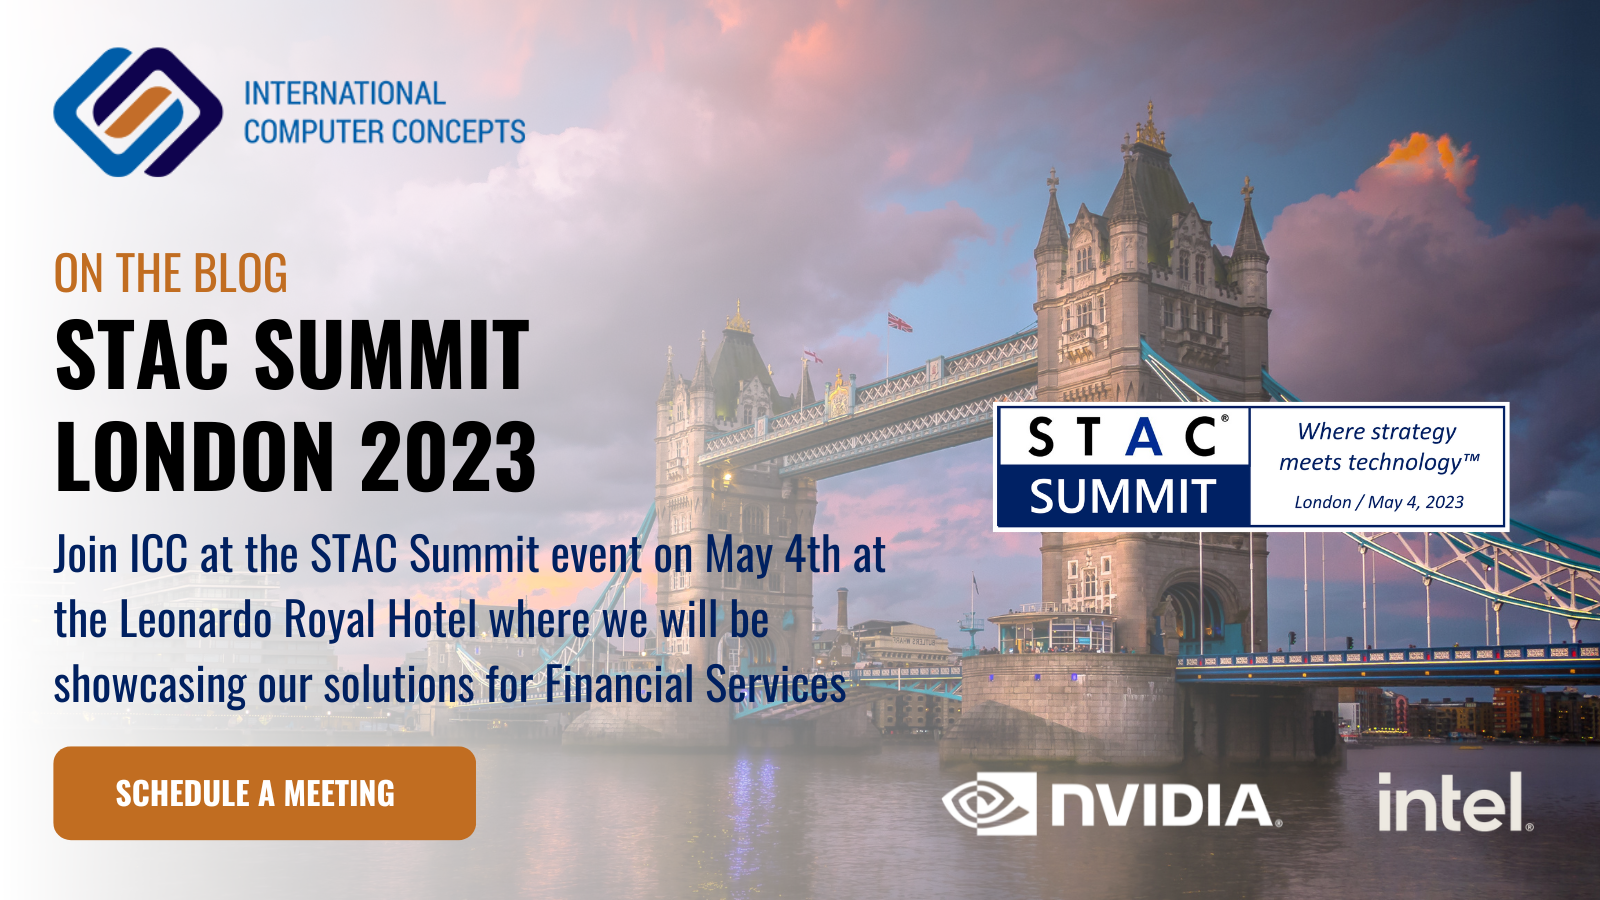 ICC to exhibit at STAC Summit London